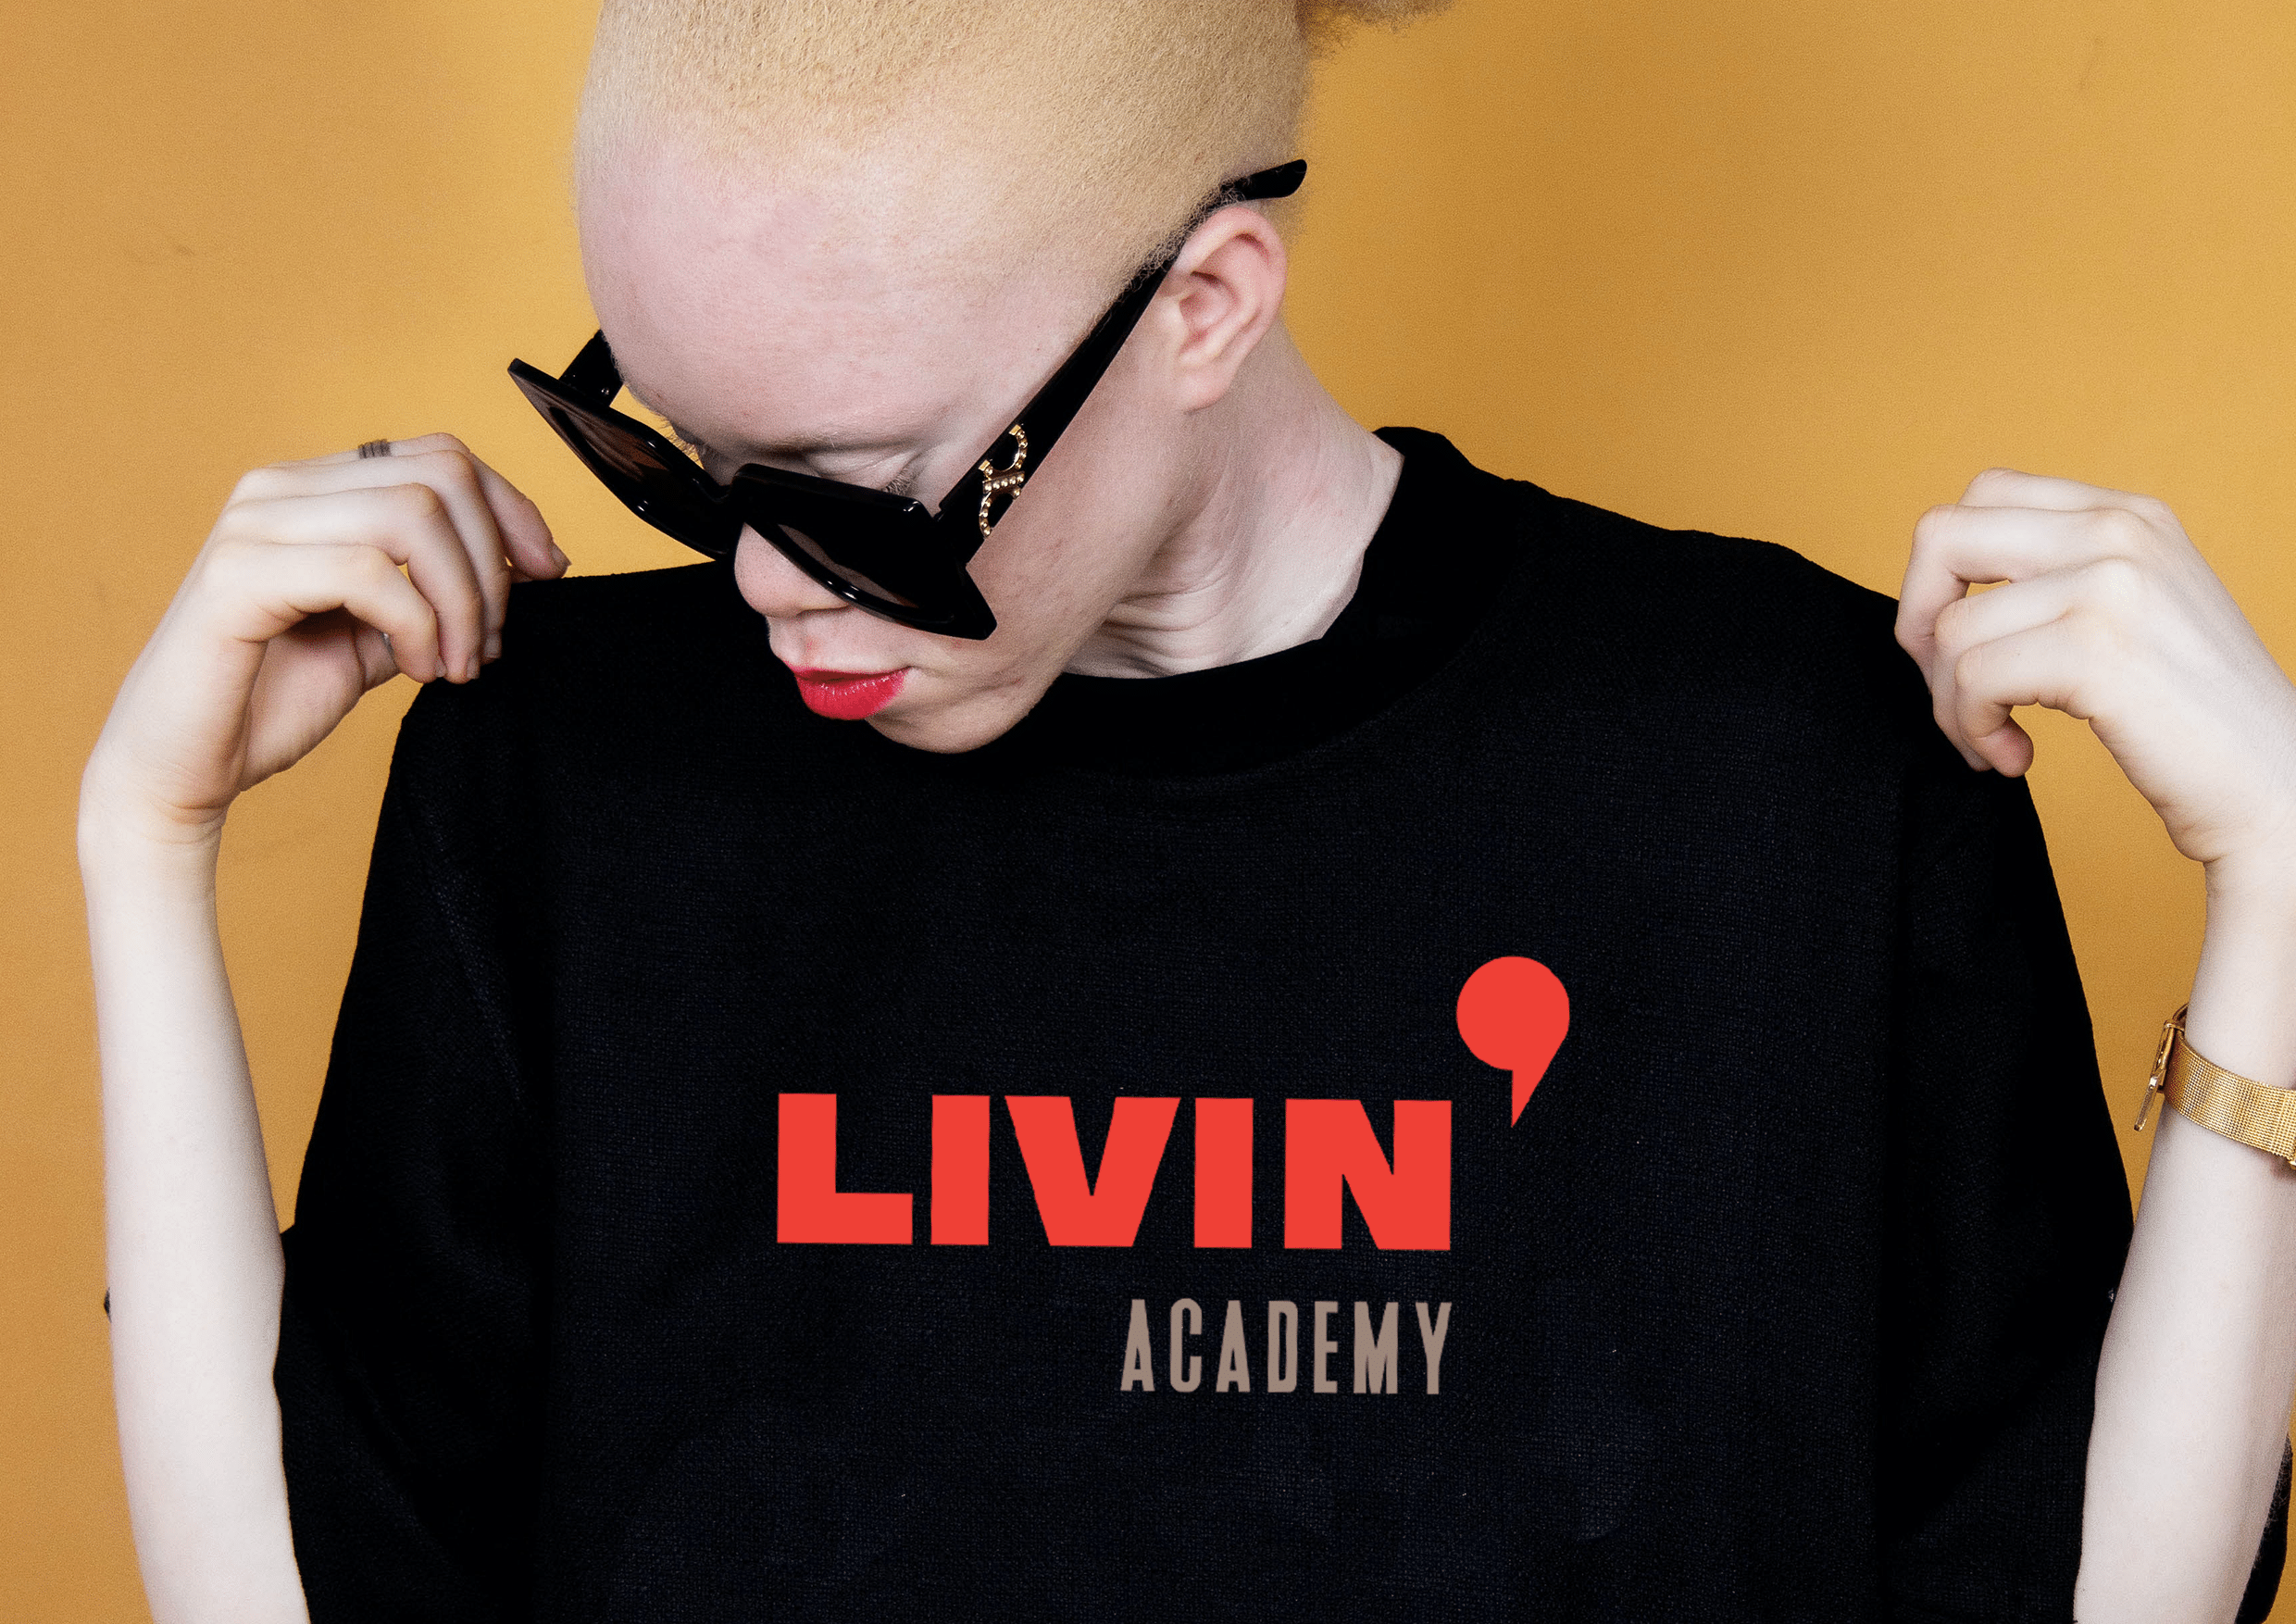 LIVIN' Academy by Kneh